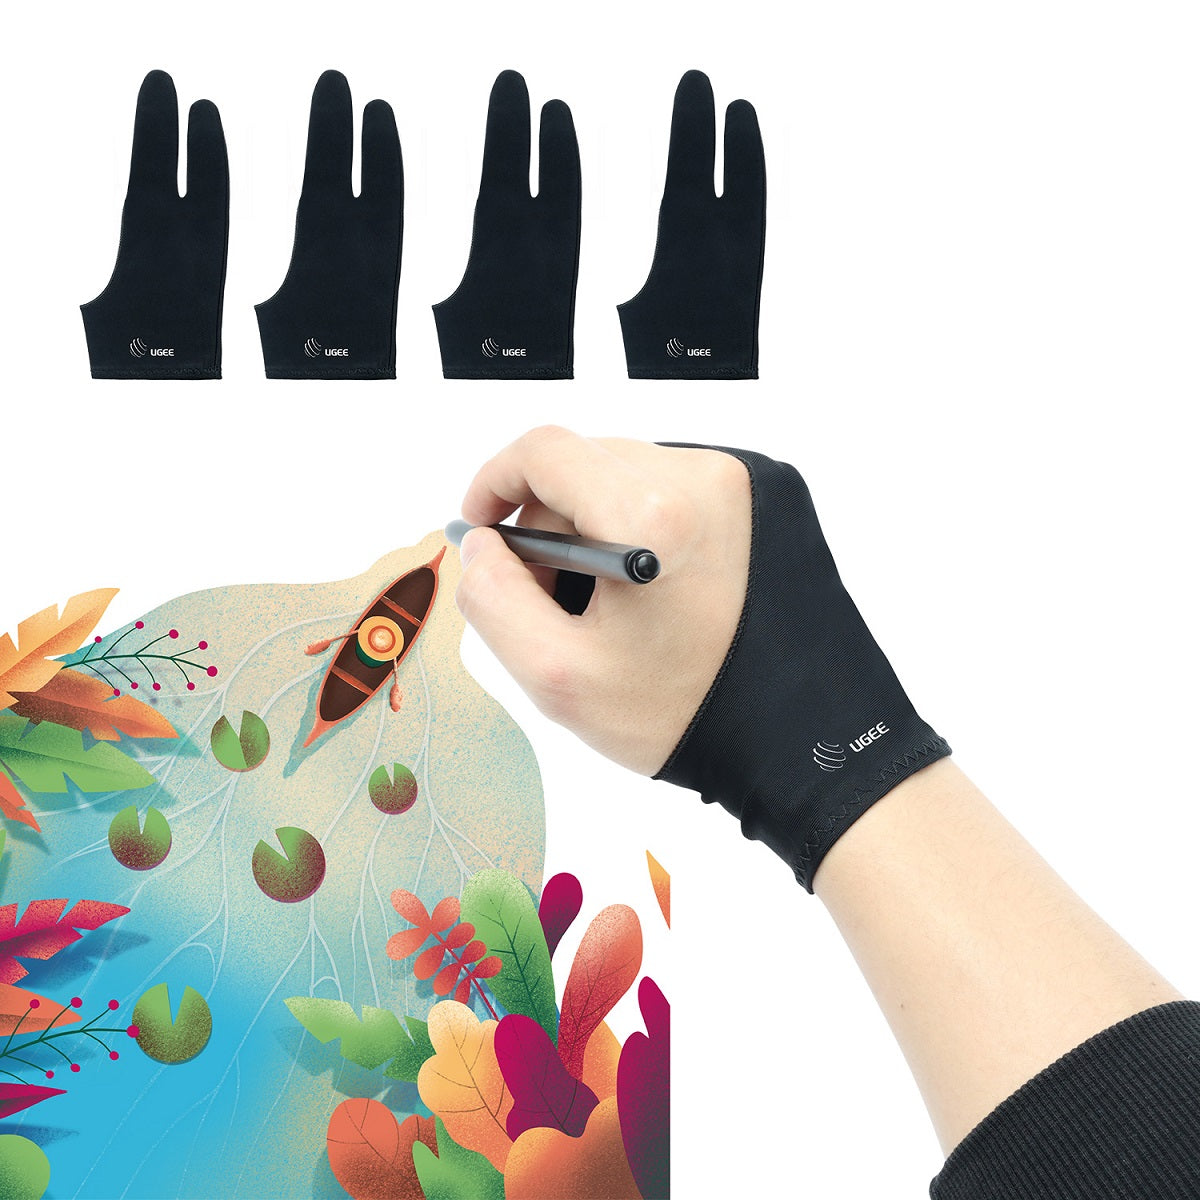 Do you really need an artists graphics tablet glove? 